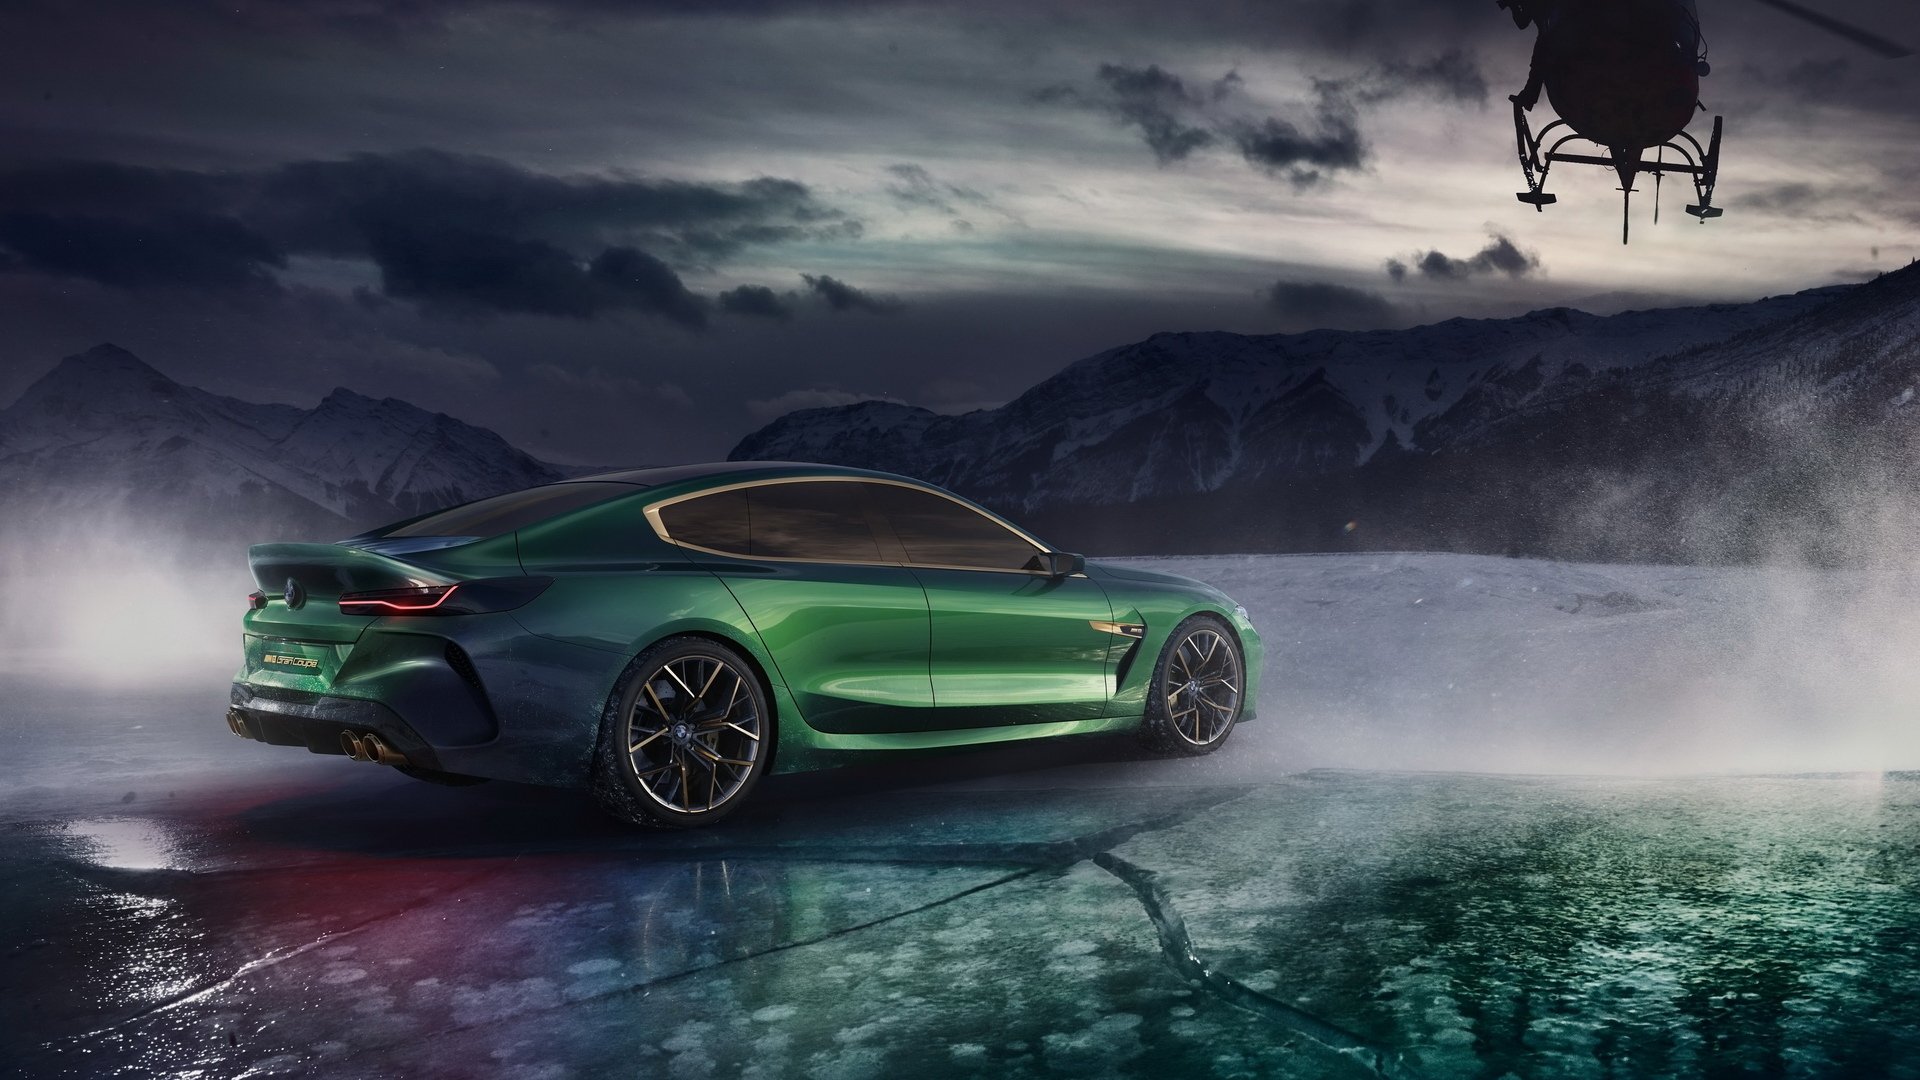 Bmw M8 Gran Coupe HD Wallpaper Background Image Id